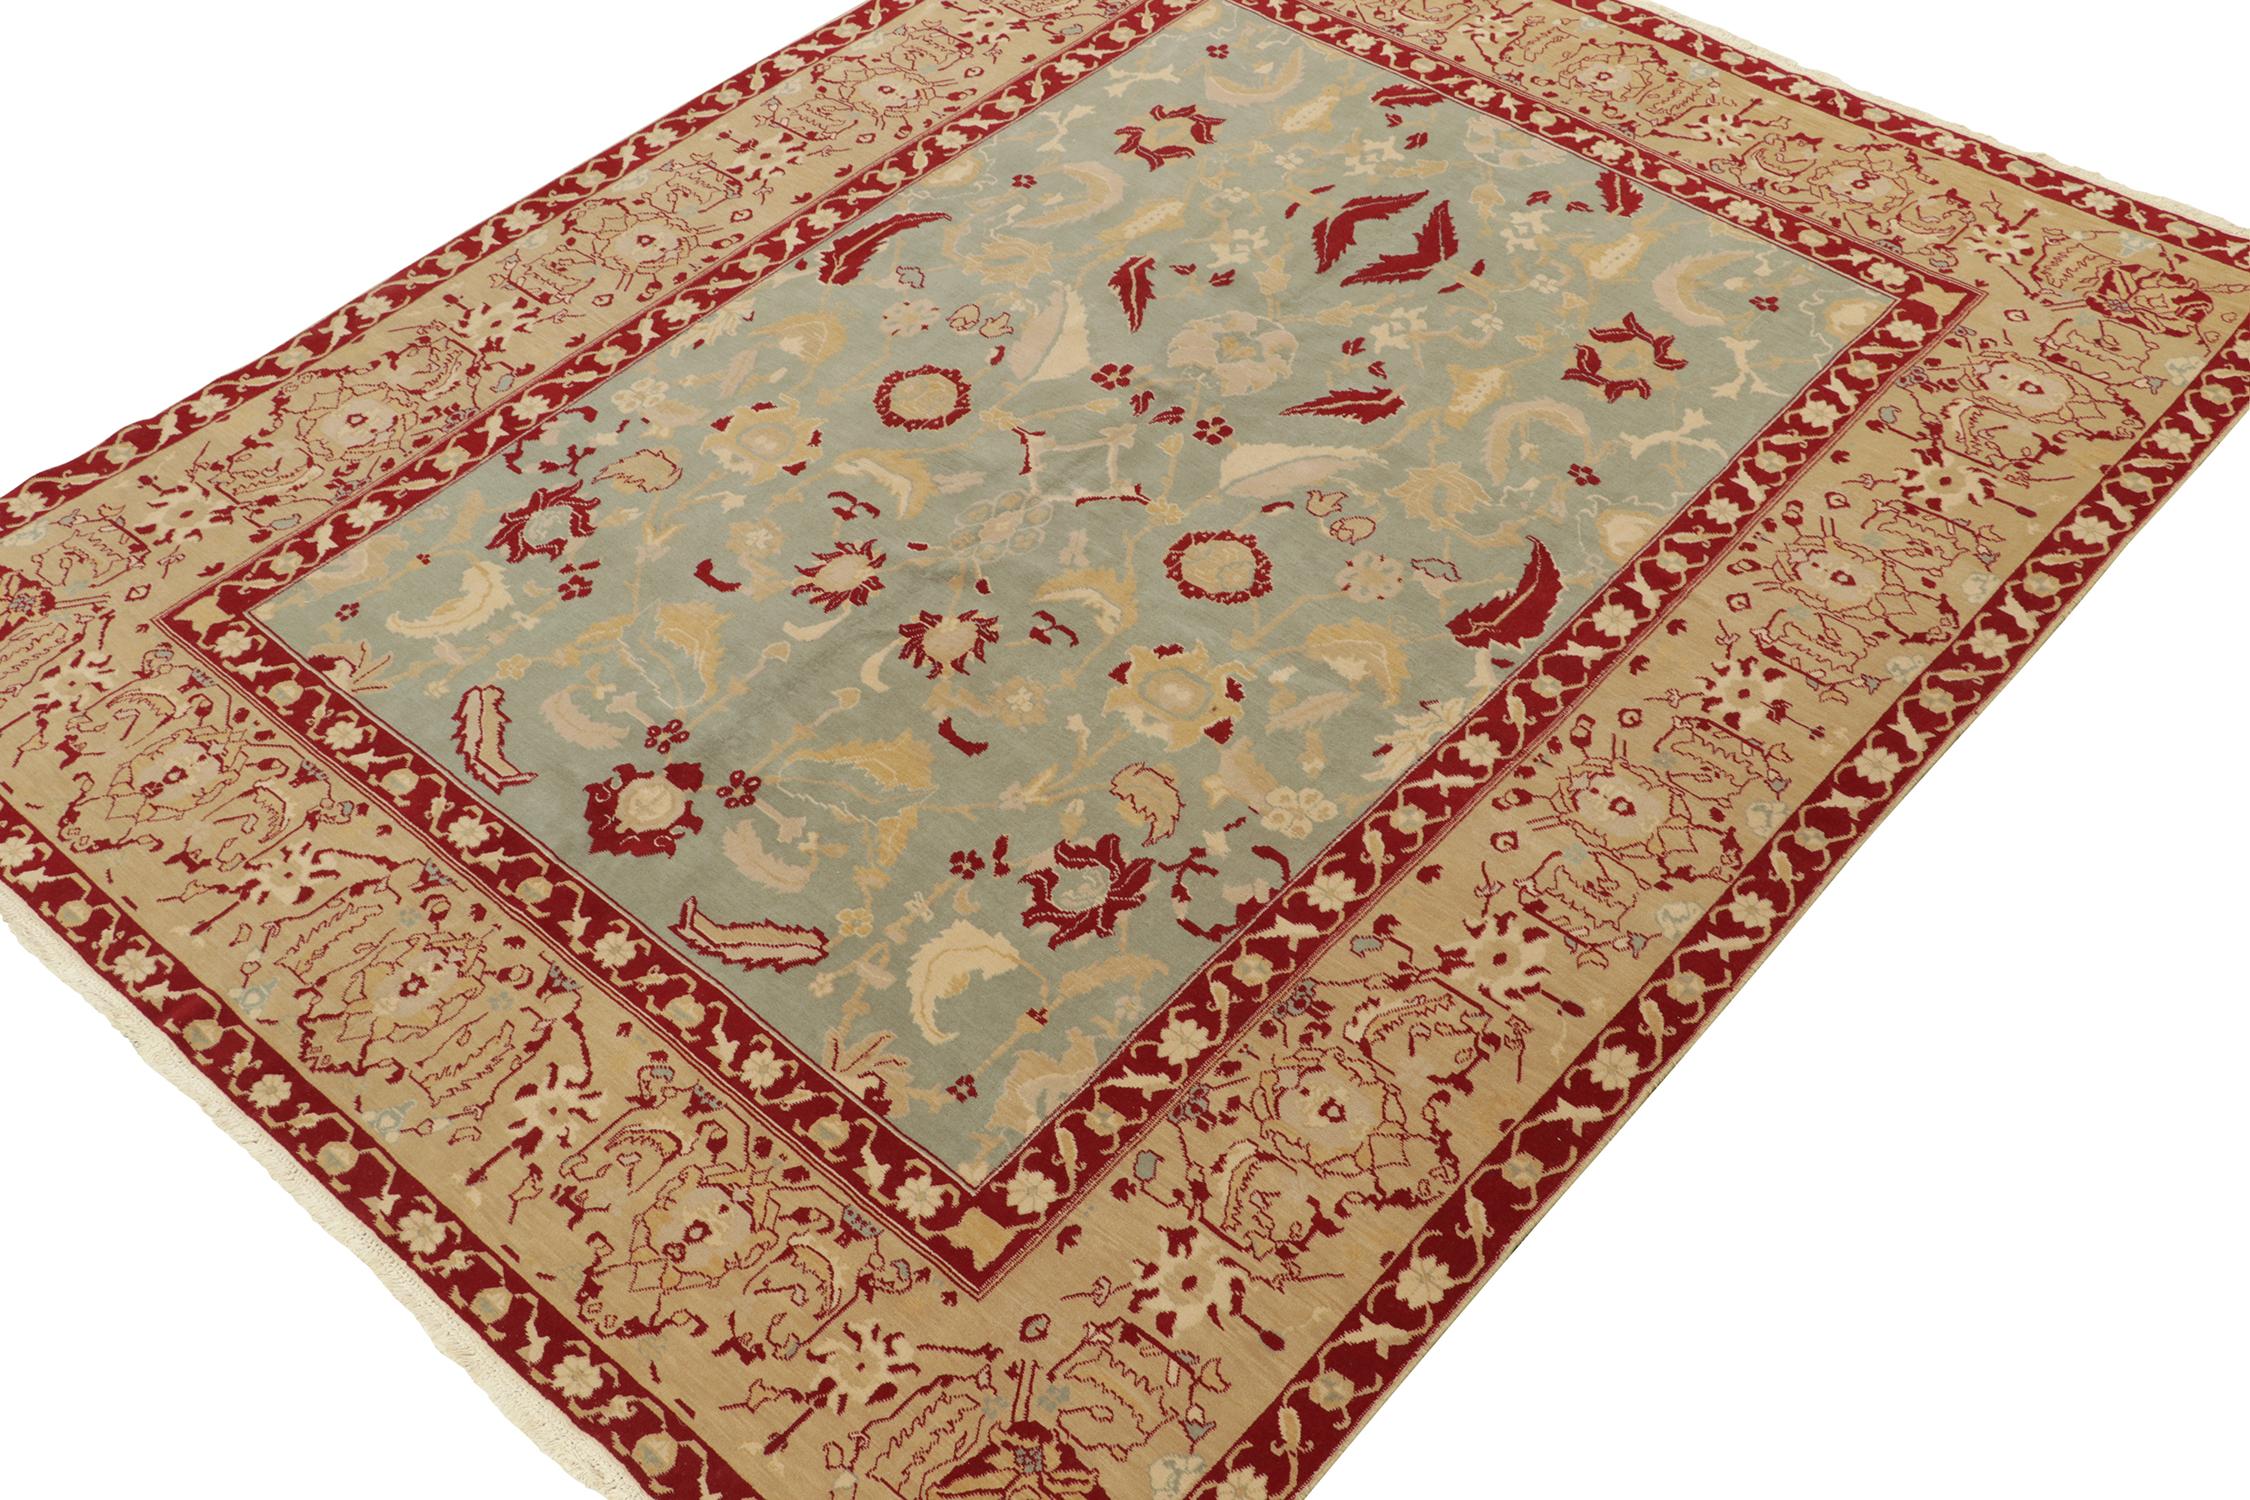 A 9x11 rug inspired from antique Agra rug styles, from Rug & Kilim’s Modern Classics Collection. Hand knotted in wool, playing an exceptional ice blue beneath red and gold in floral patterns with classic grace.
Further On the Design:
The play of